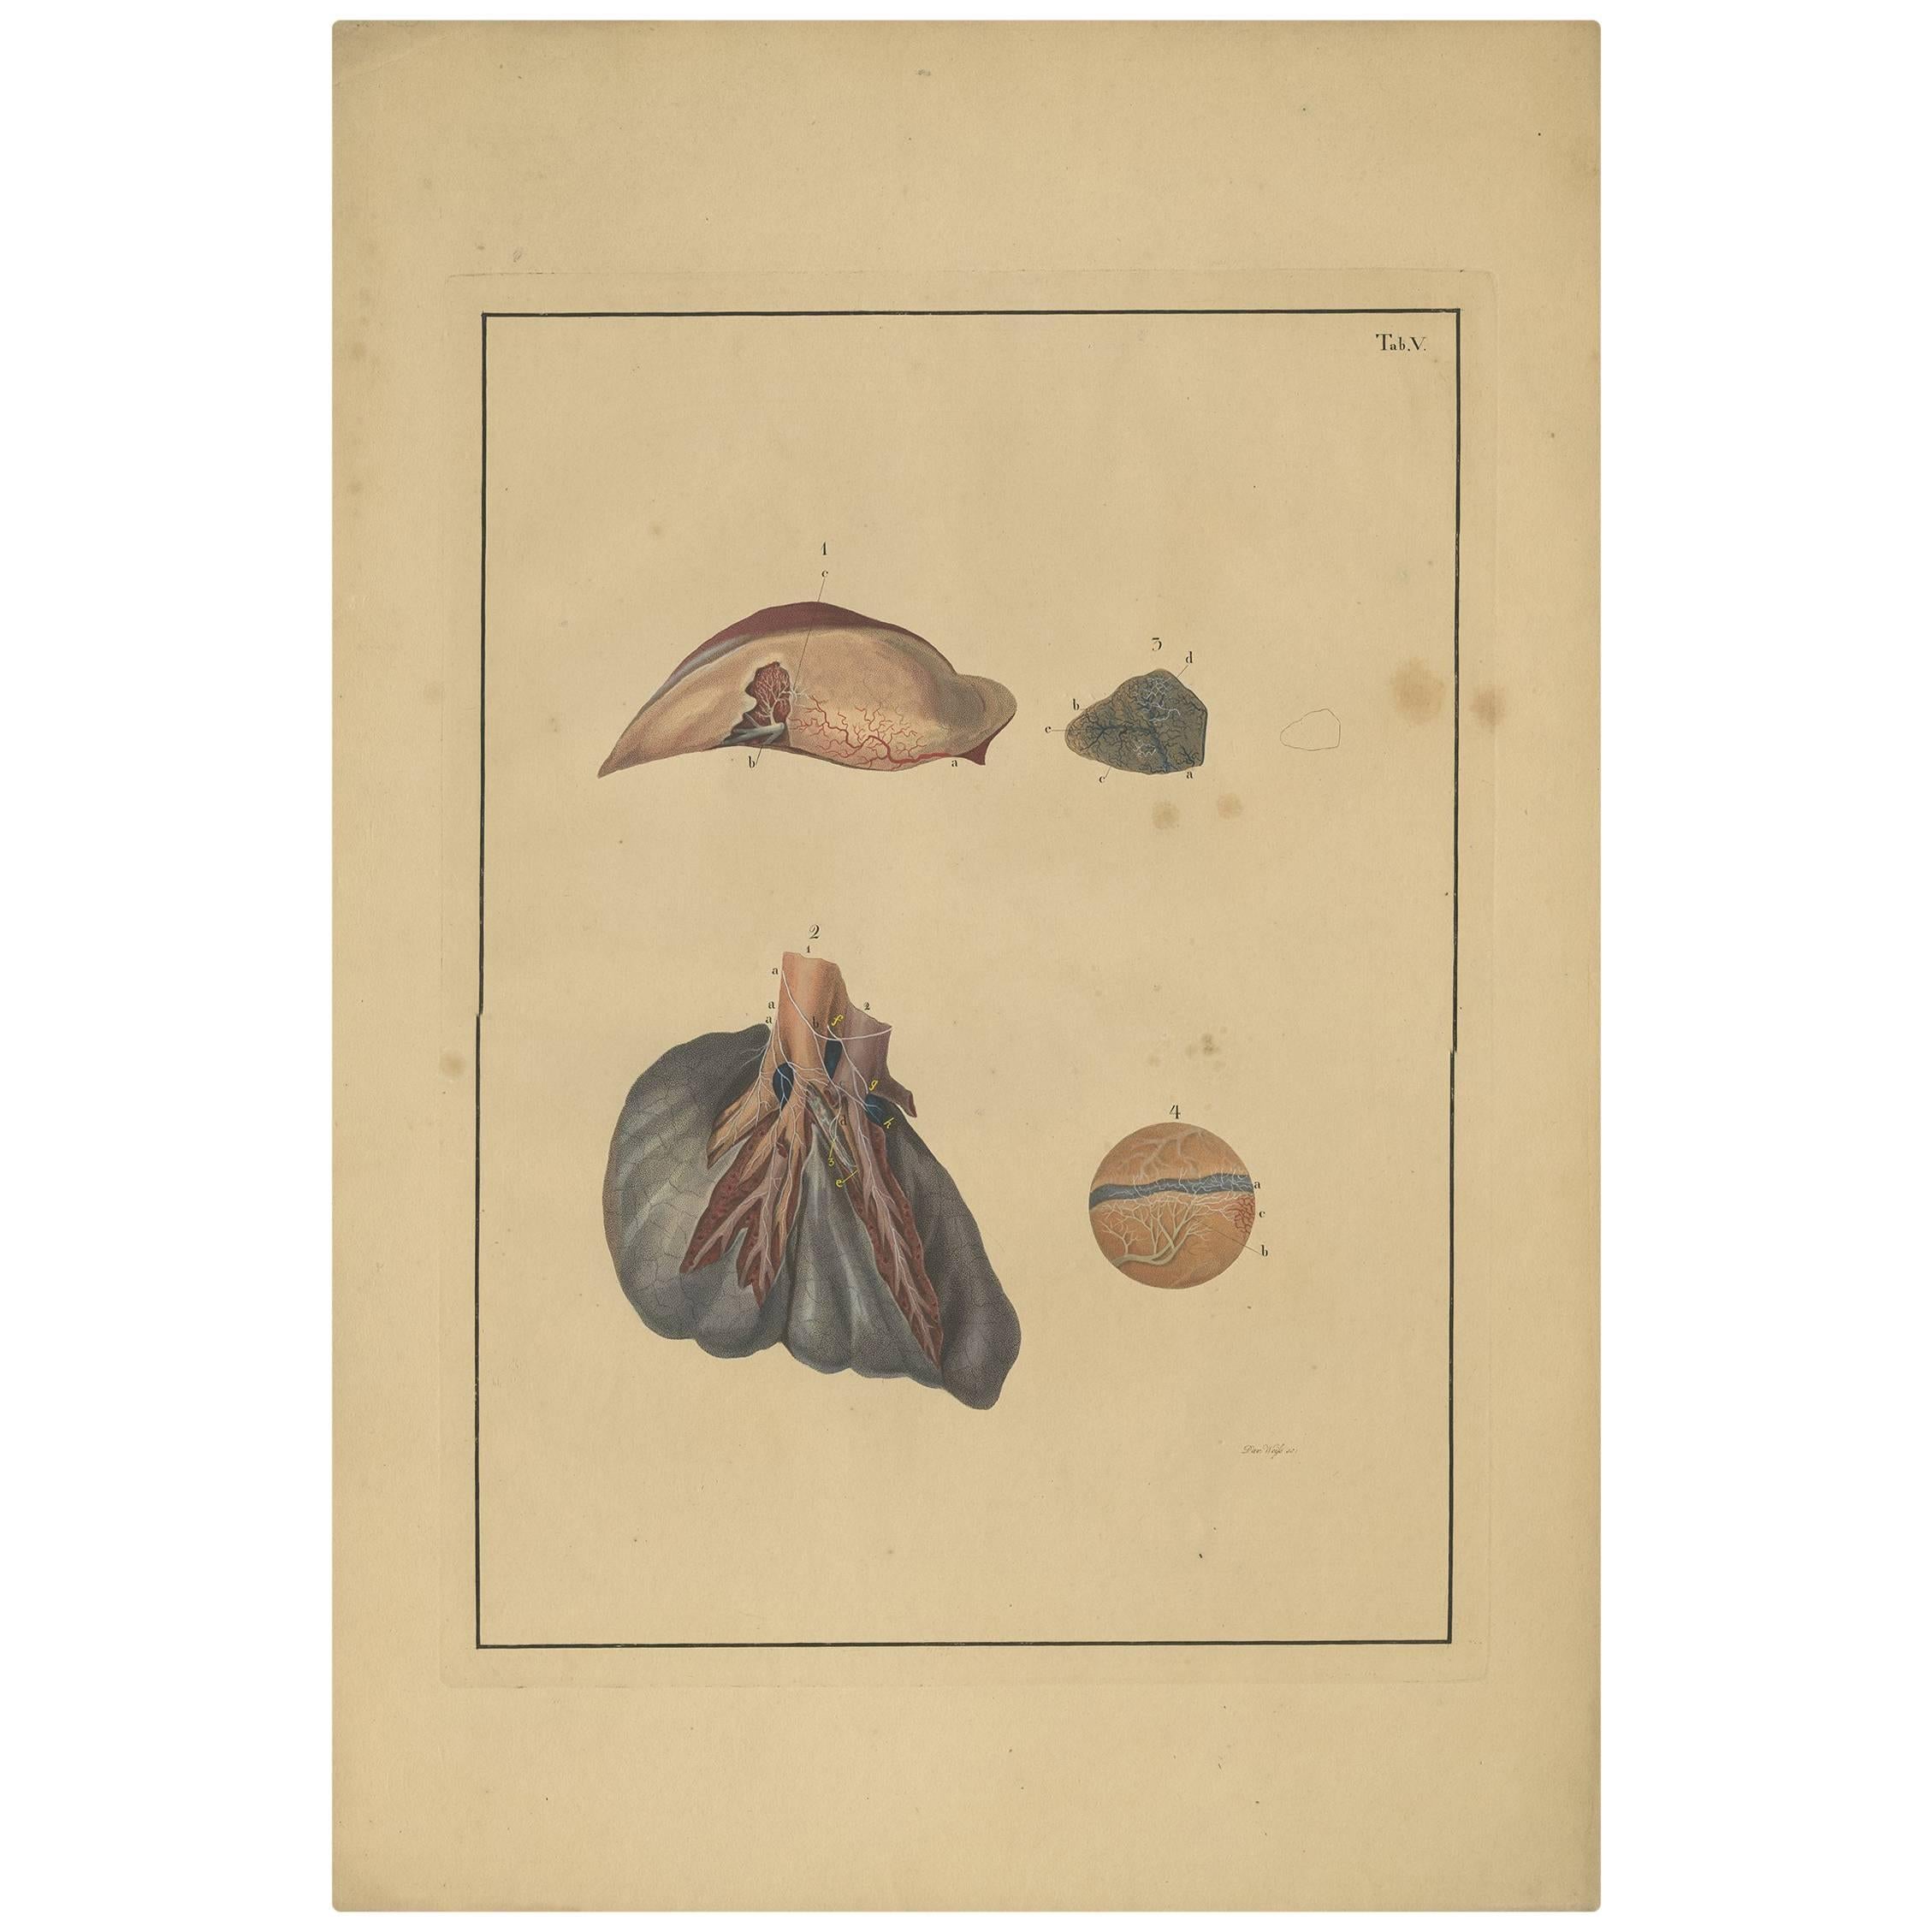 Antique Medical Print of Lungs 'Tab. 5' by F.D. Reisseisen, 1822